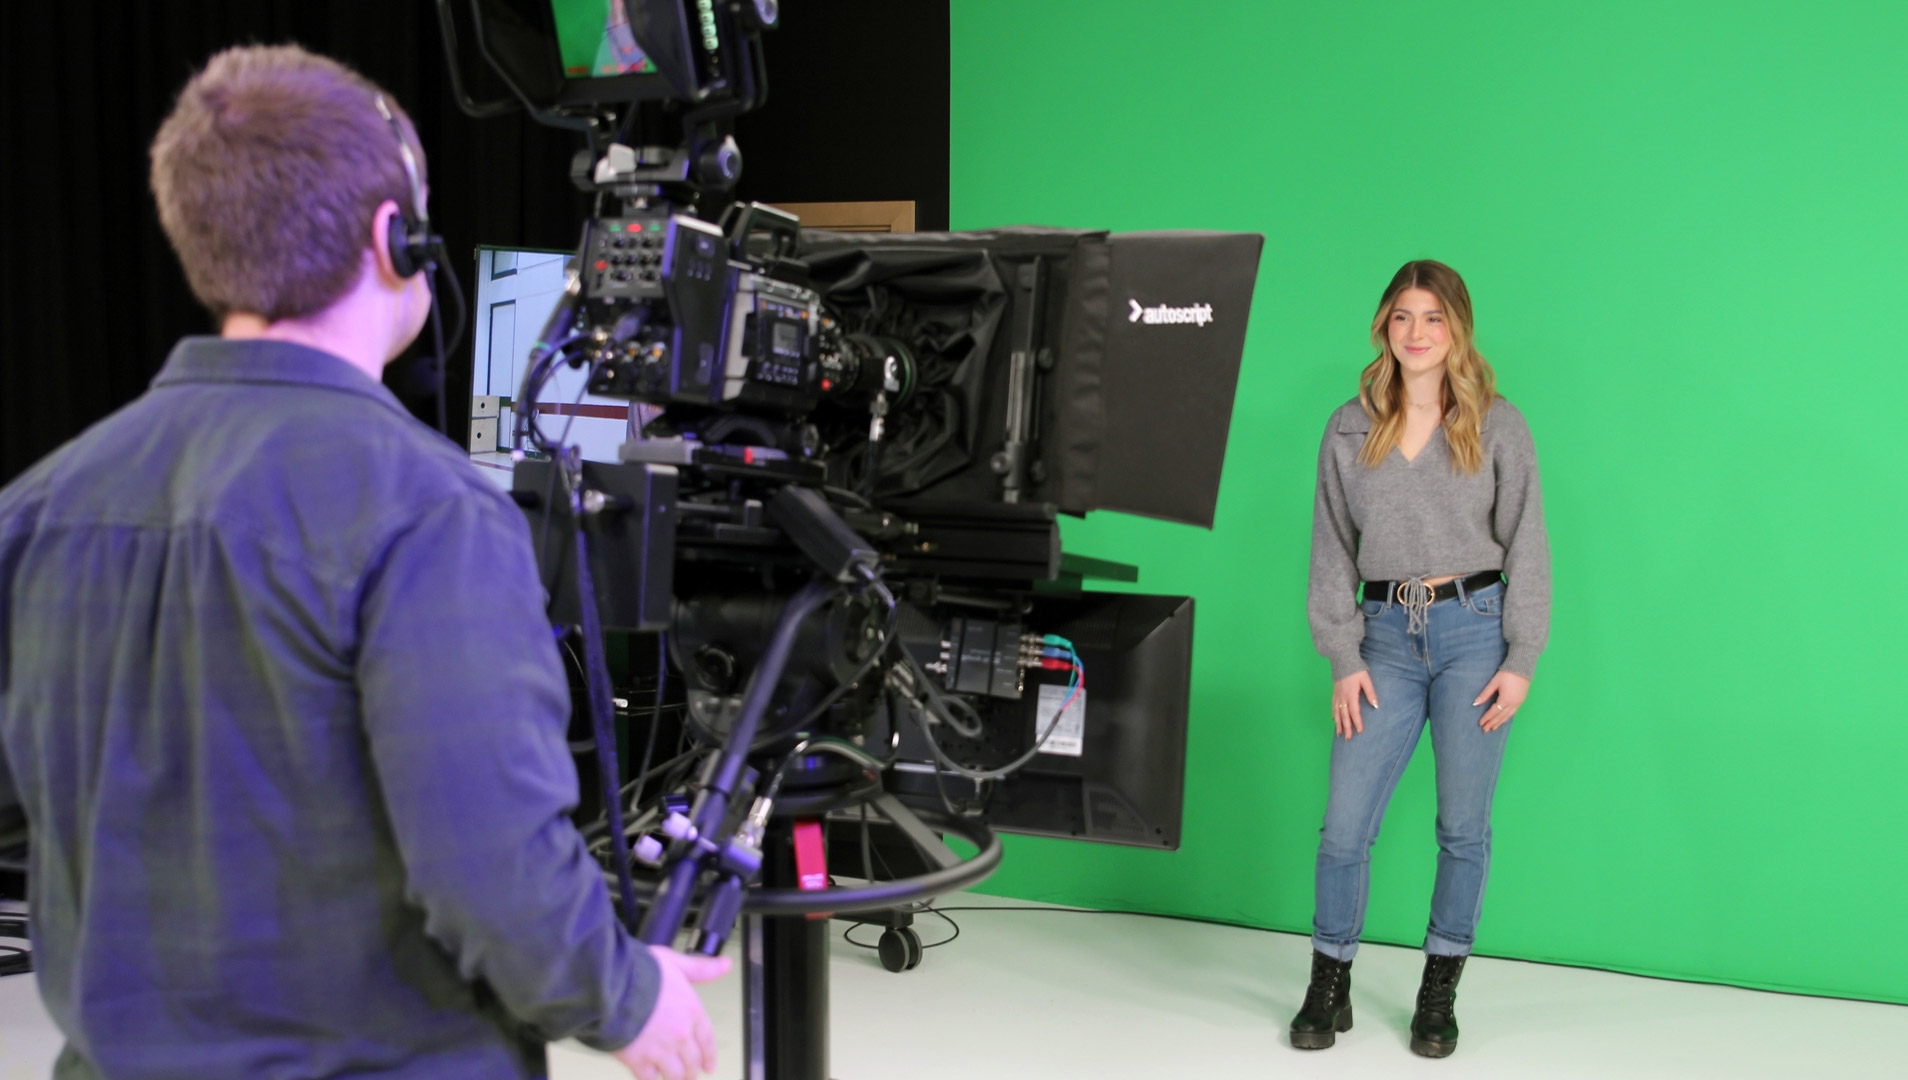 Two media and communications students, one standing behind a professional TV camera, recording the other student in front of a green screen.